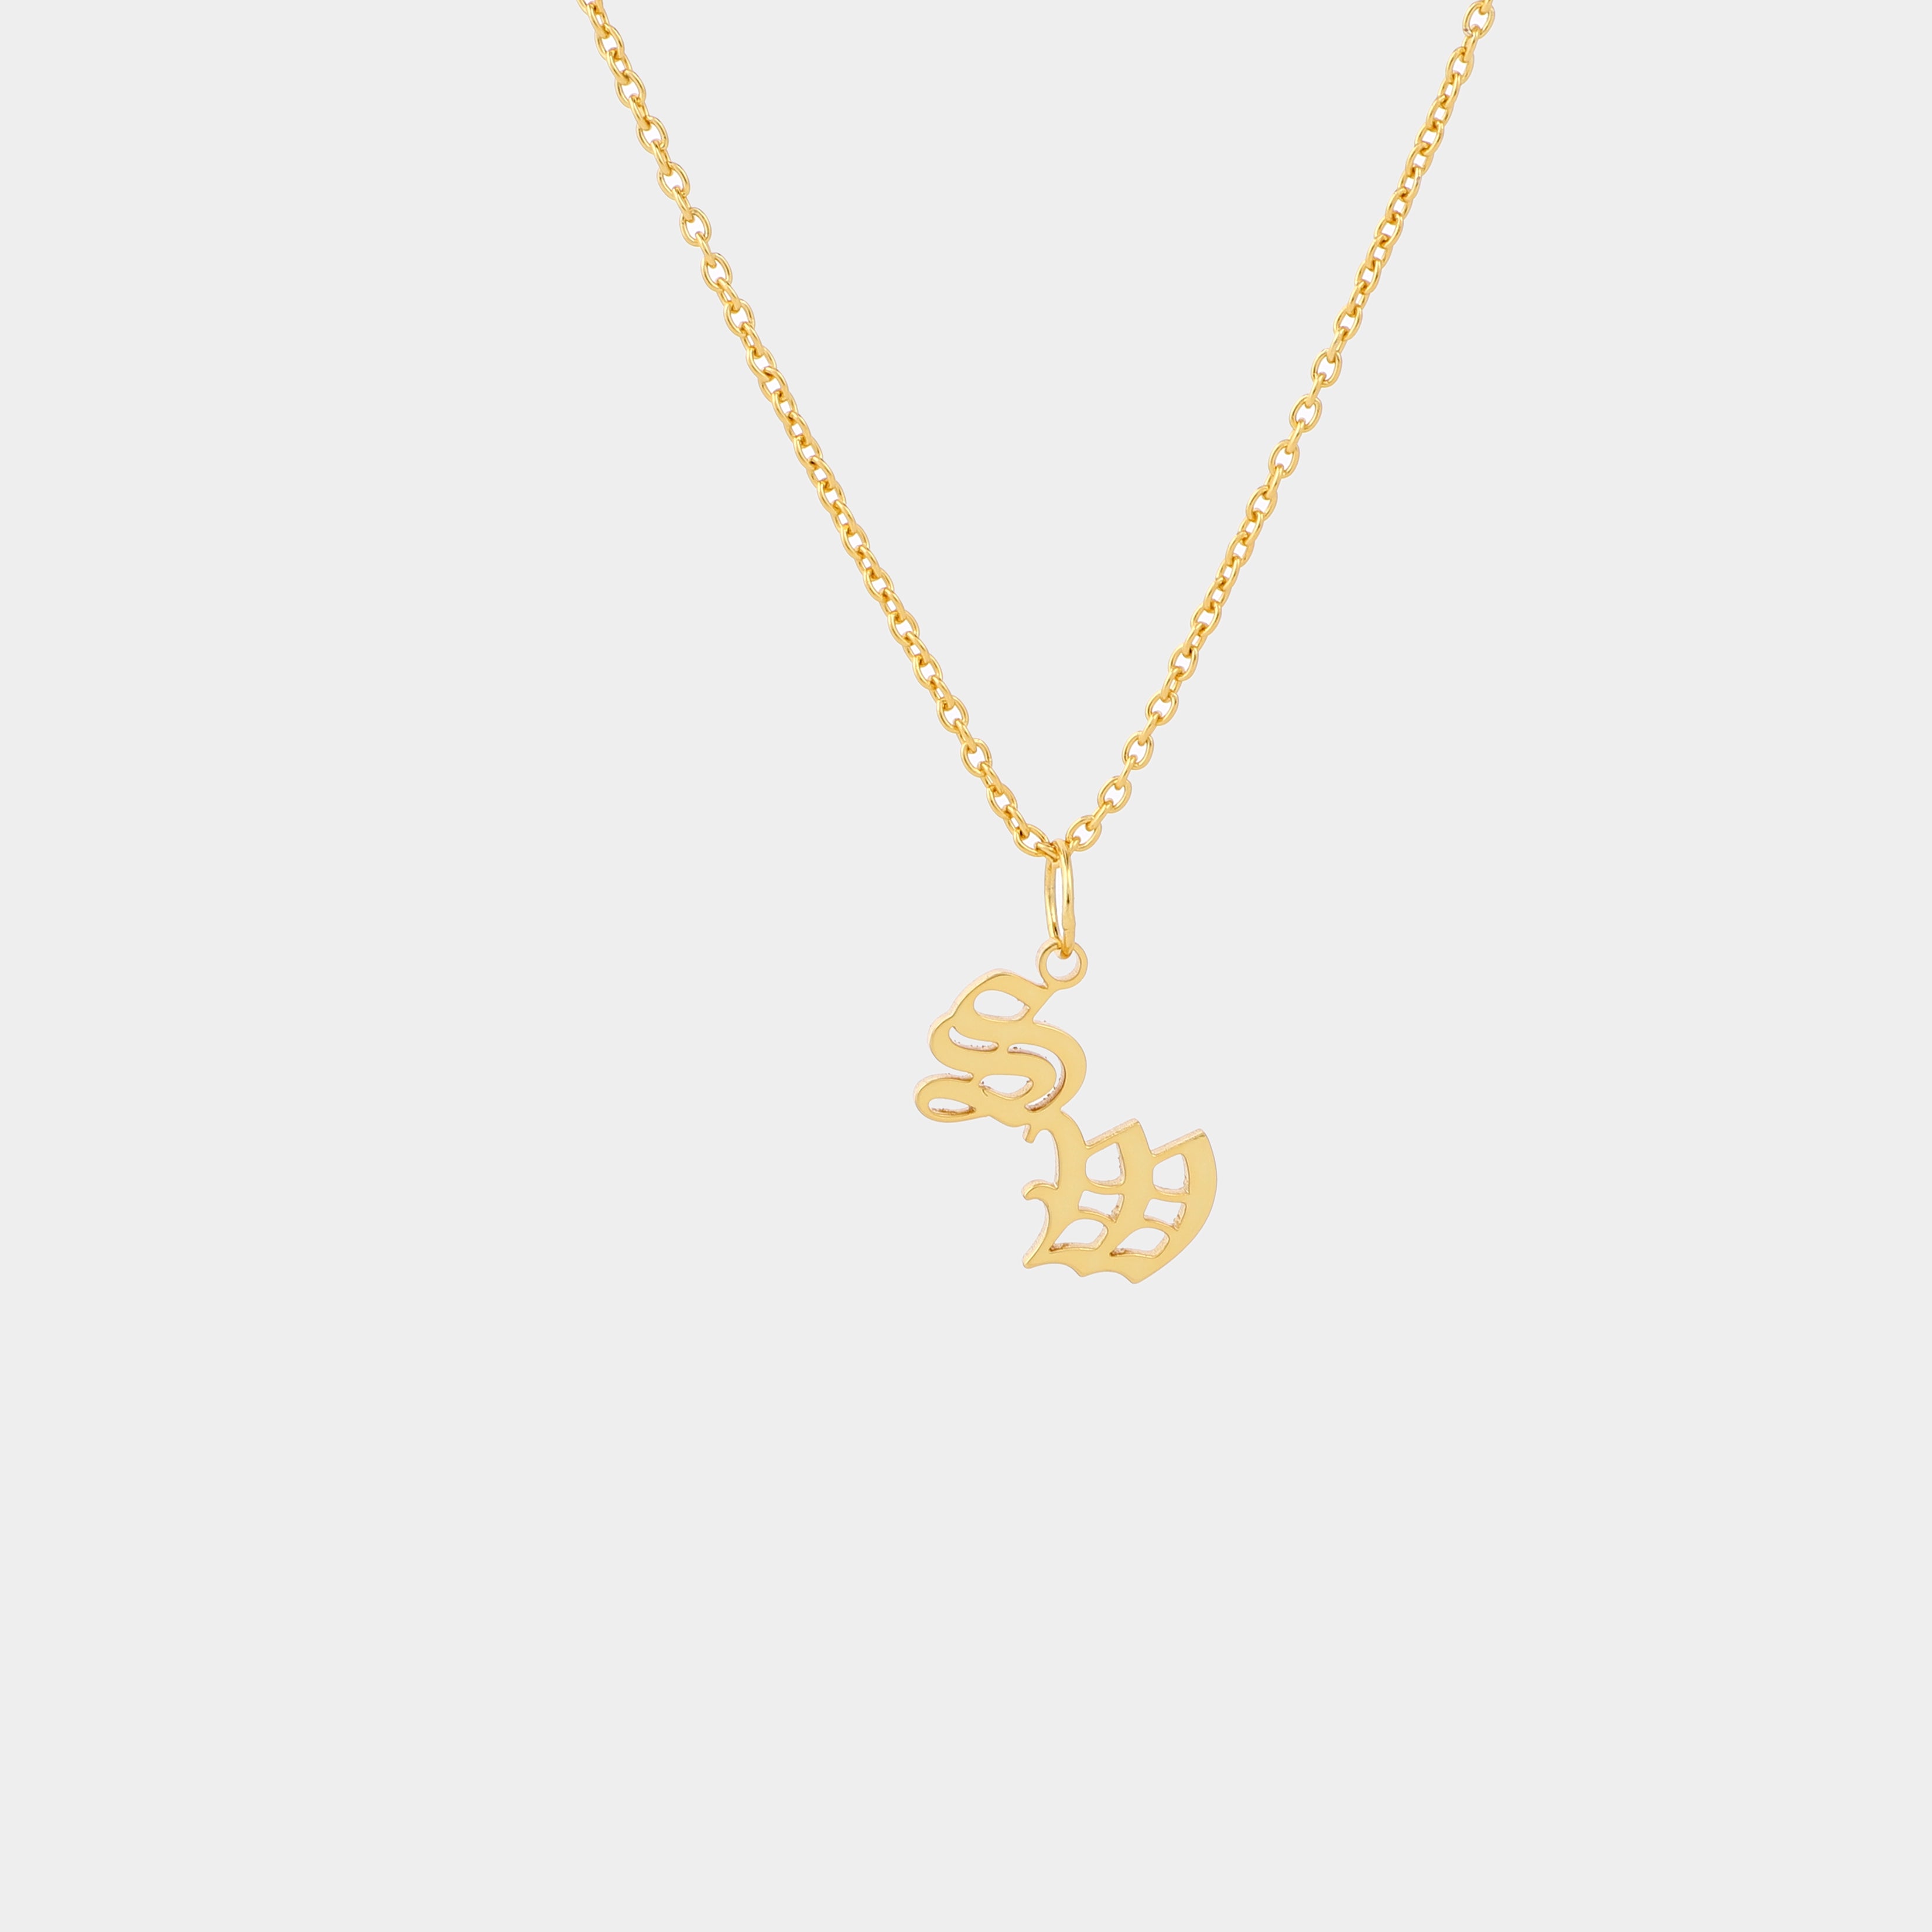 PERSONALIZE INITIAL NECKLACE